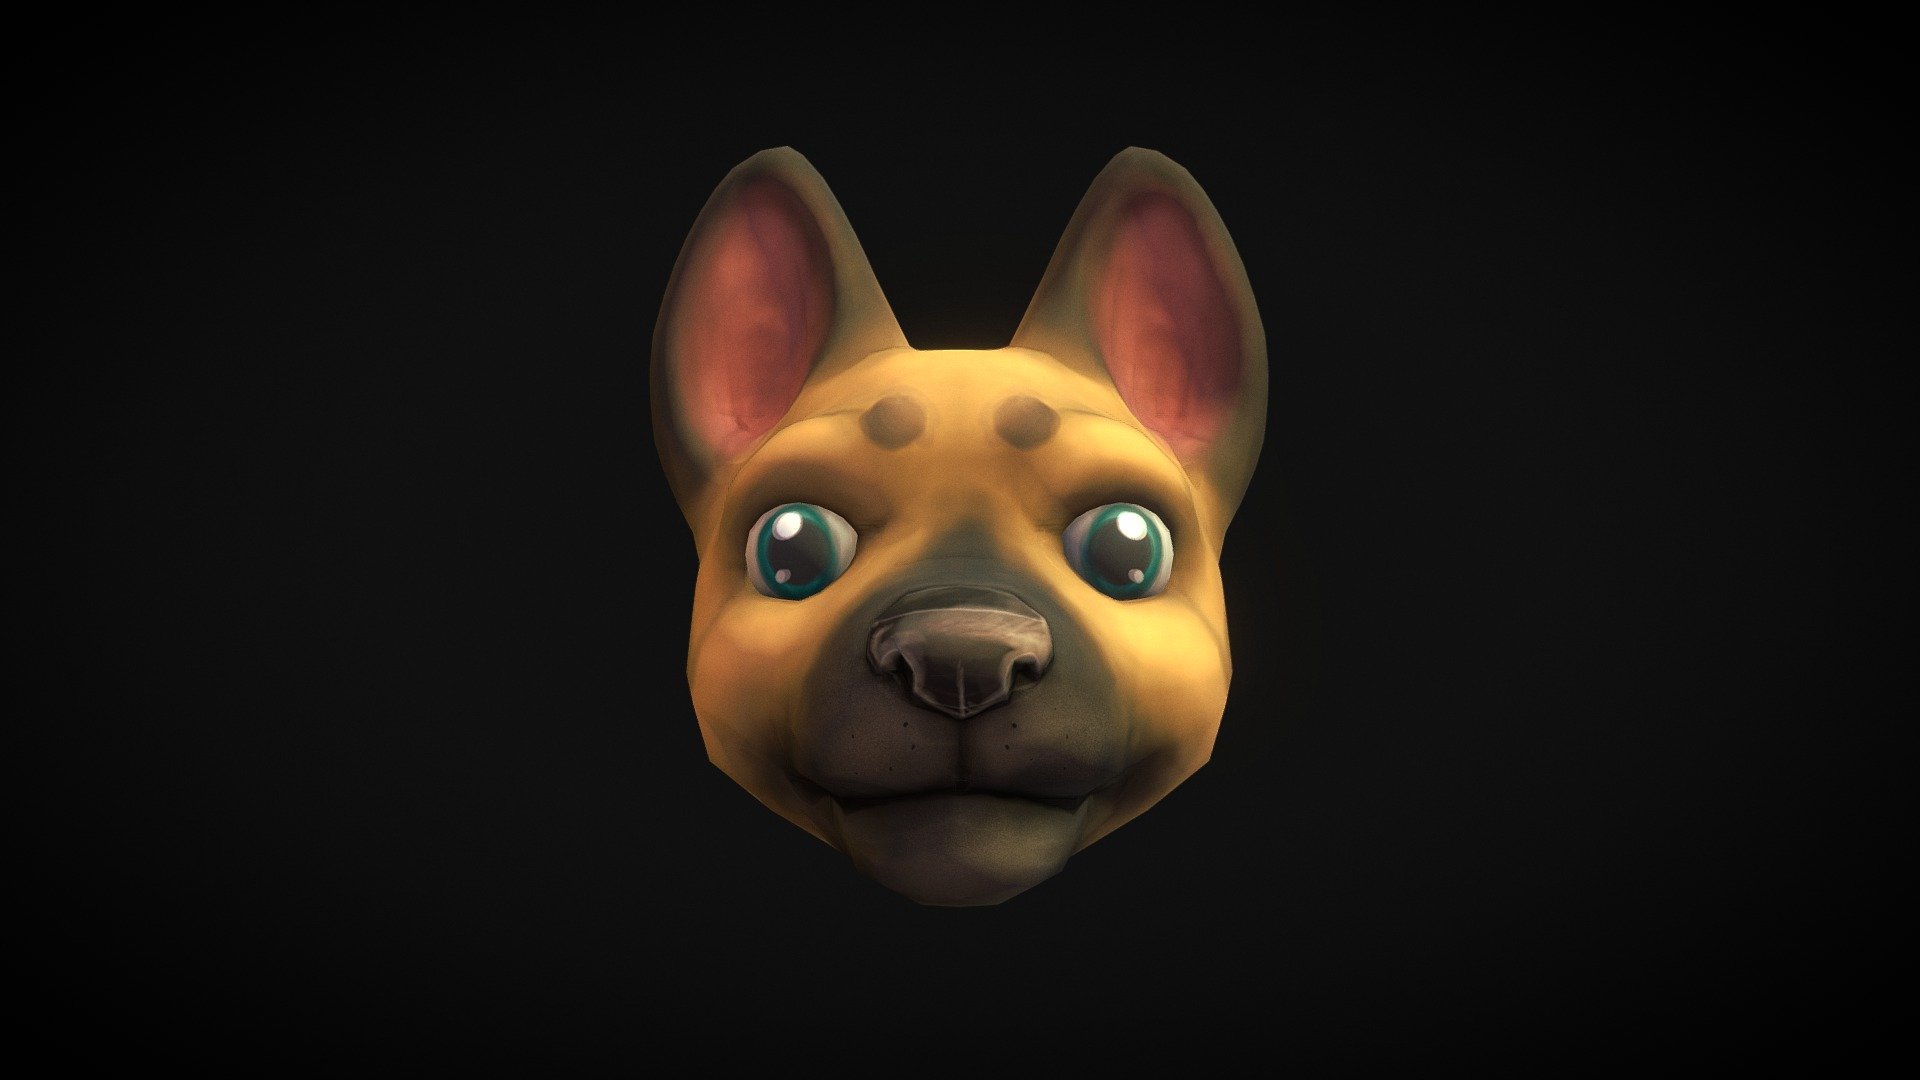 A quick little dog head I made &lsquo;cause needed a break from larger projects. I might continue this when I have more time 3d model